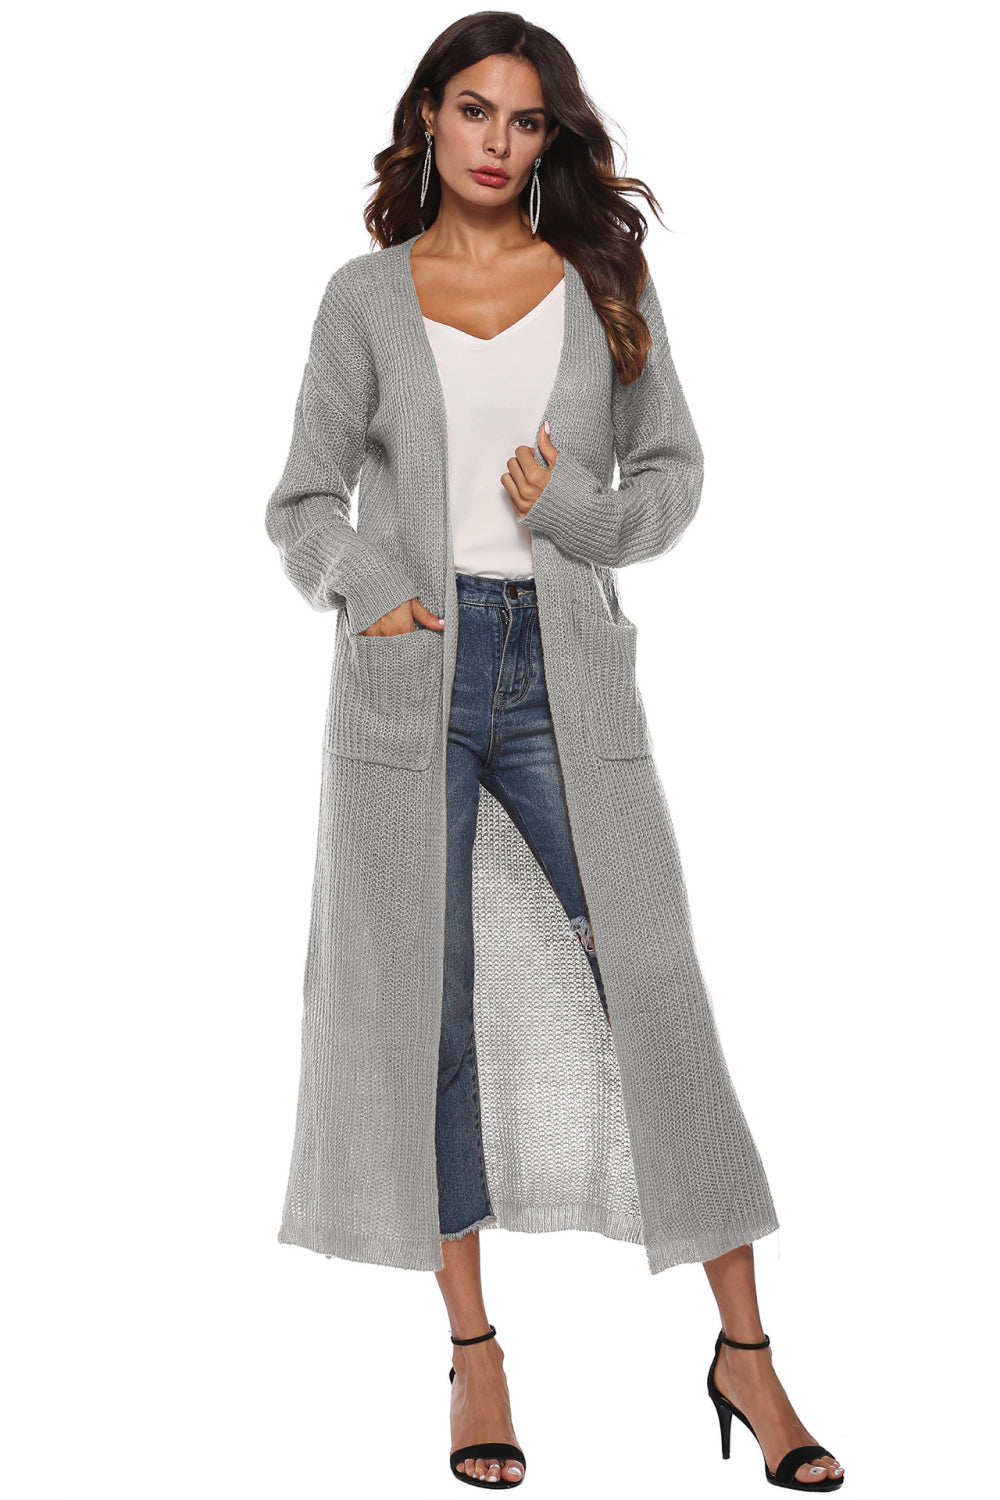 Long Sleeve Open Front Buttoned Cardigan - nailedmoms